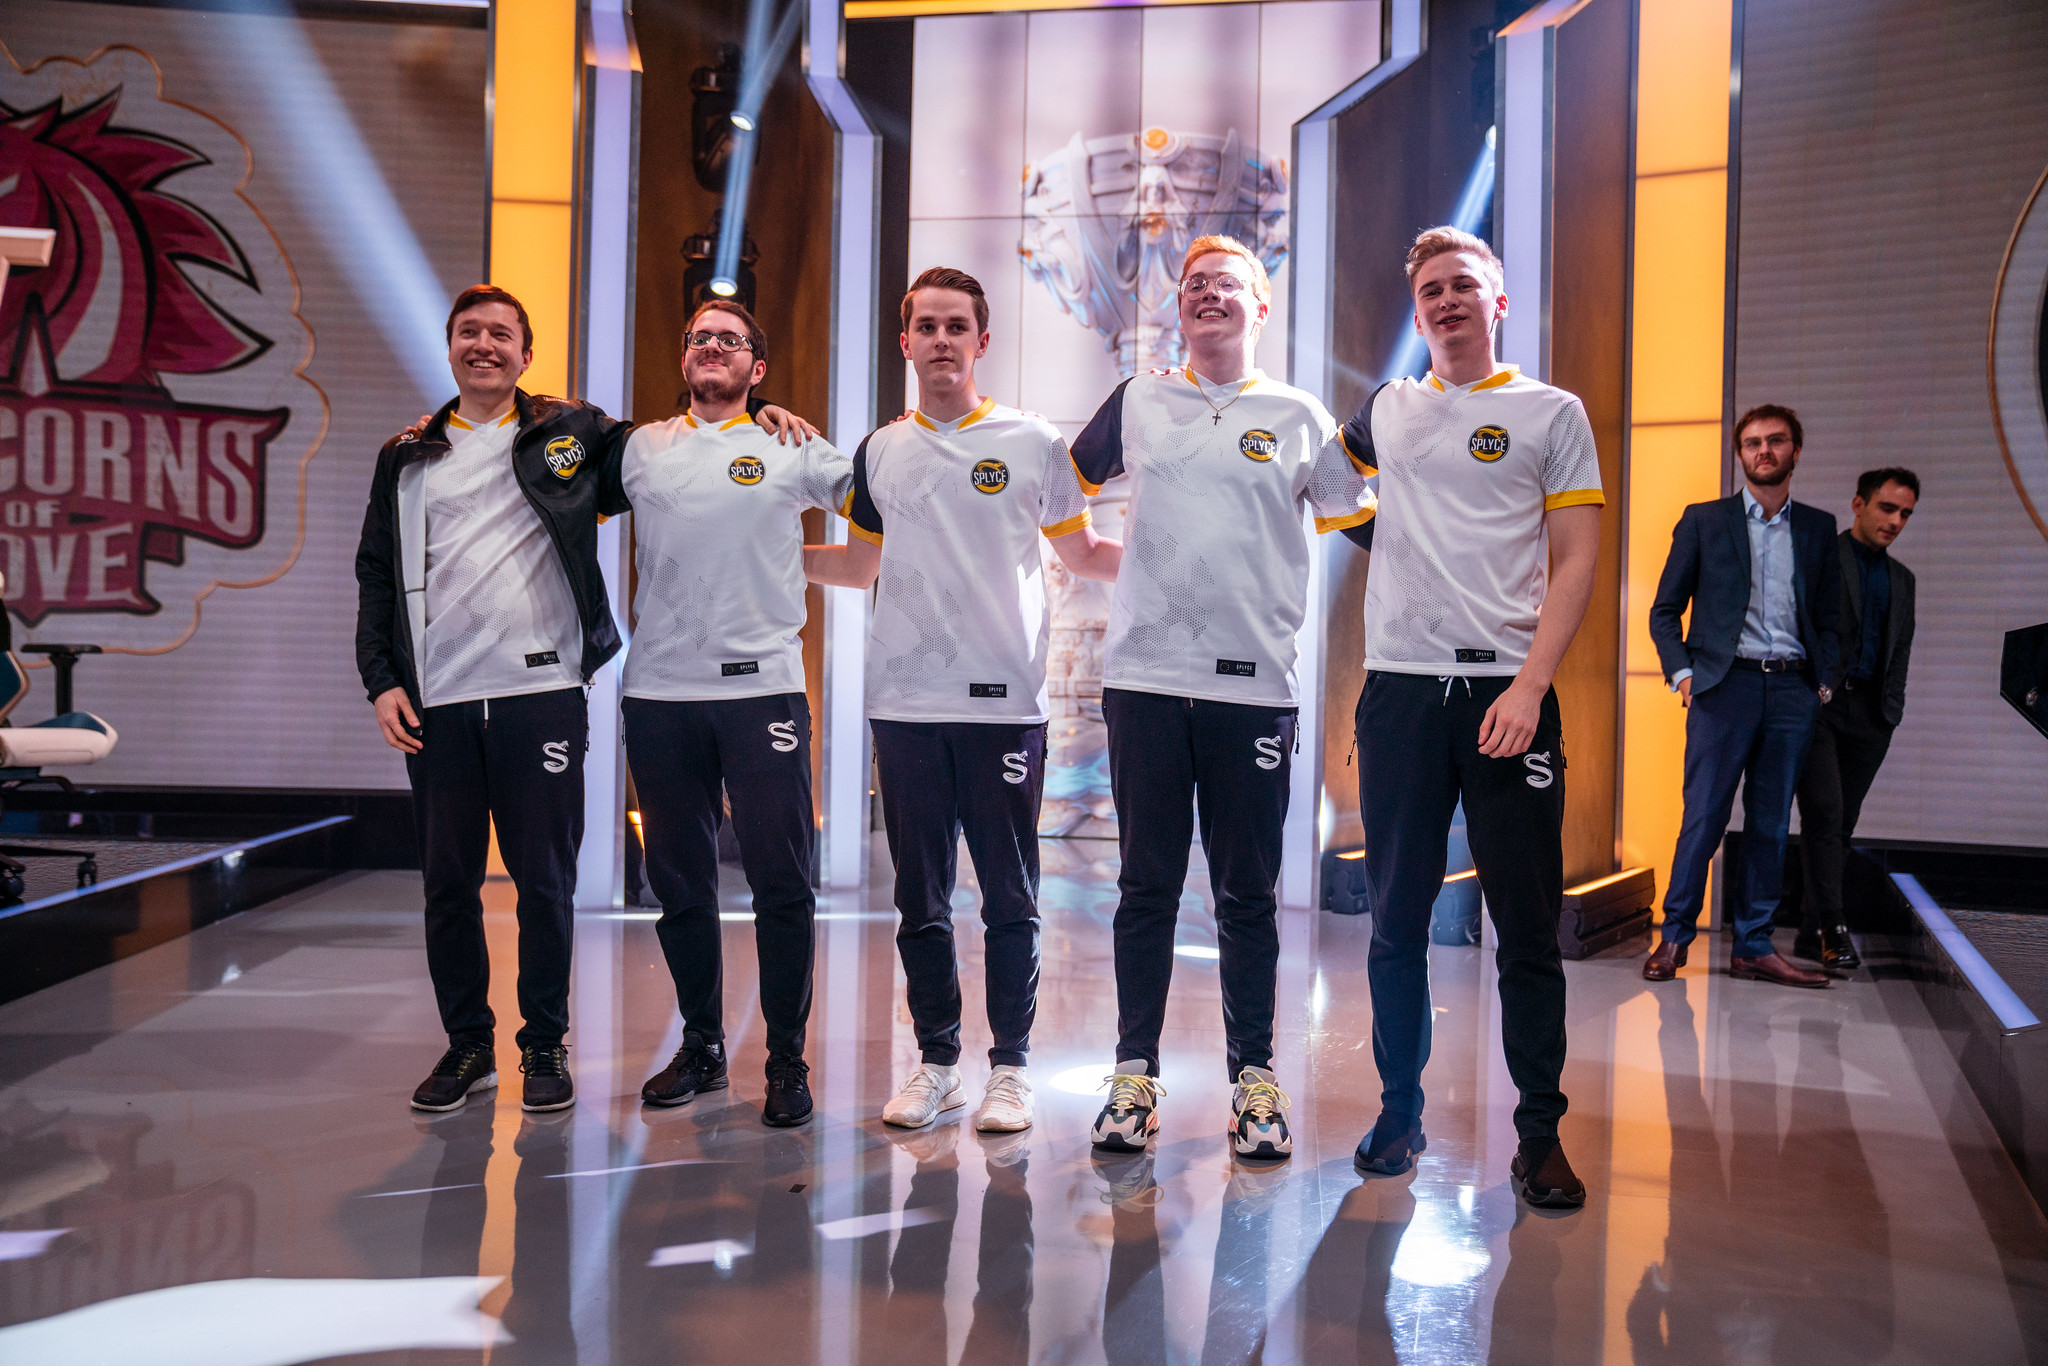 Splyce Stop Unicorns Of Love In Game 5 To Advance To The Worlds 2019 Main Event Dot Esports The unicorns of love became infamous for their unique, aggressive playstyle, unconventional picks, and even item builds. dot esports